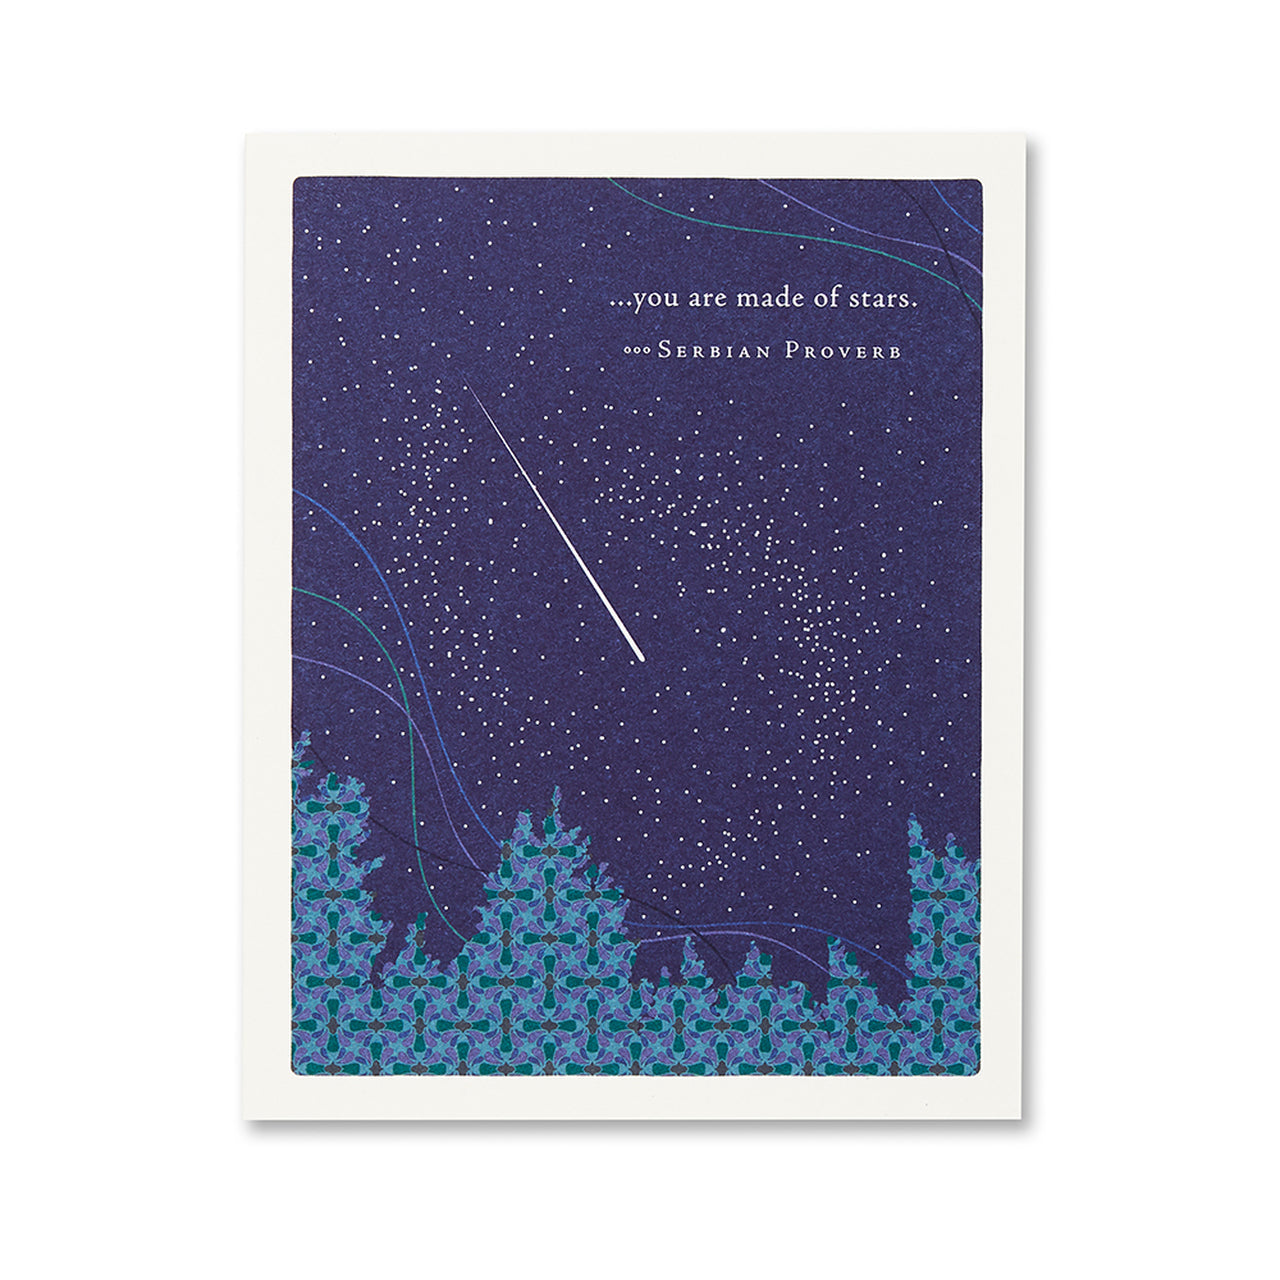 Positively Green Greeting Card - Encouragement - "...You Are Made Of Stars" - Serbian Proverb - Mellow Monkey